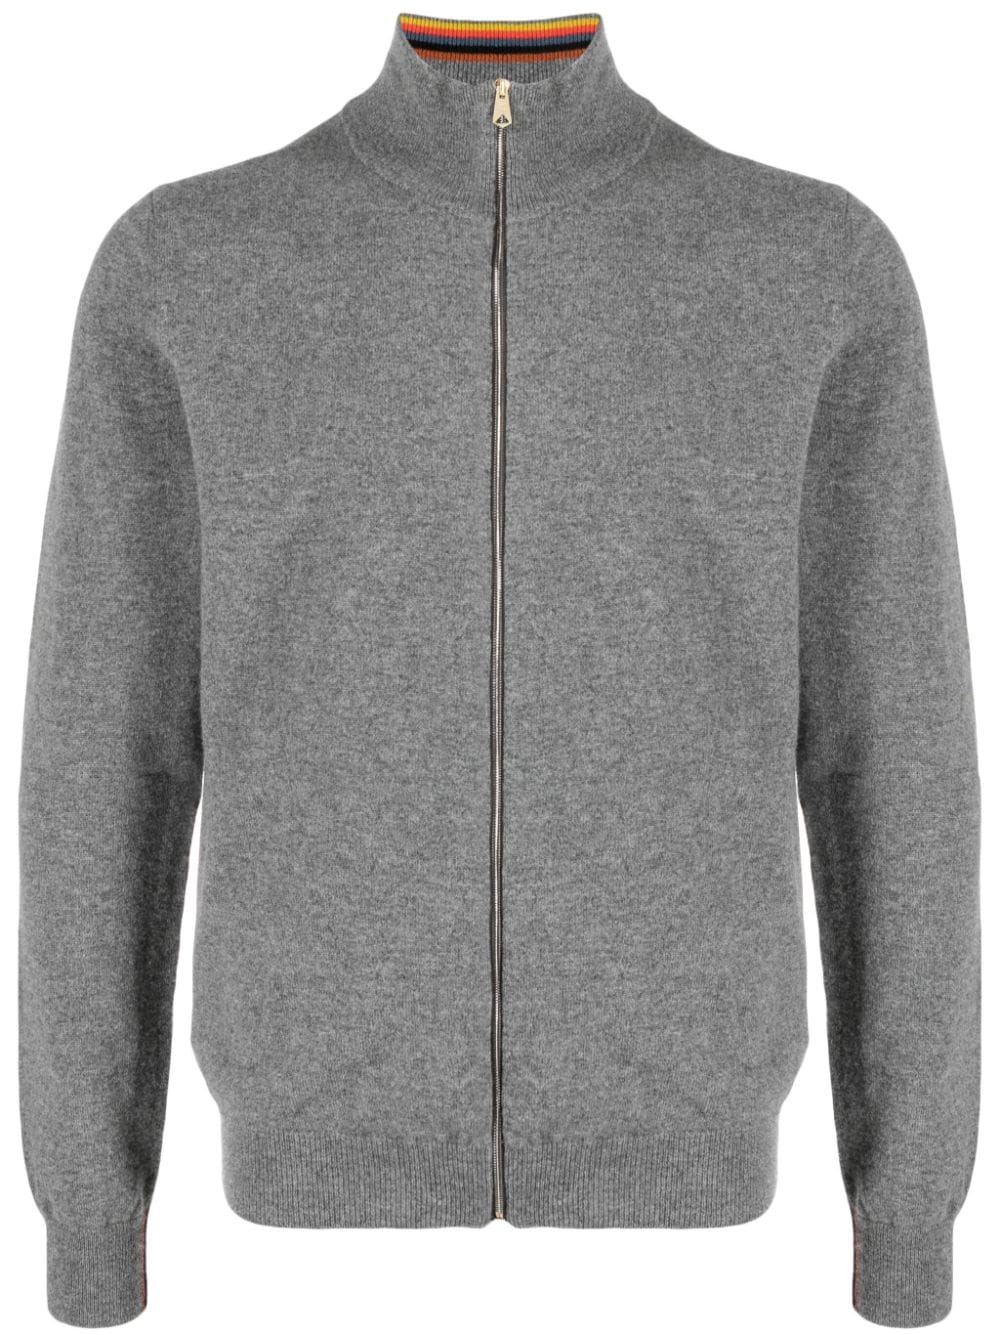 PAUL SMITH Luxurious Cashmere Zip-Up Cardigan for Men